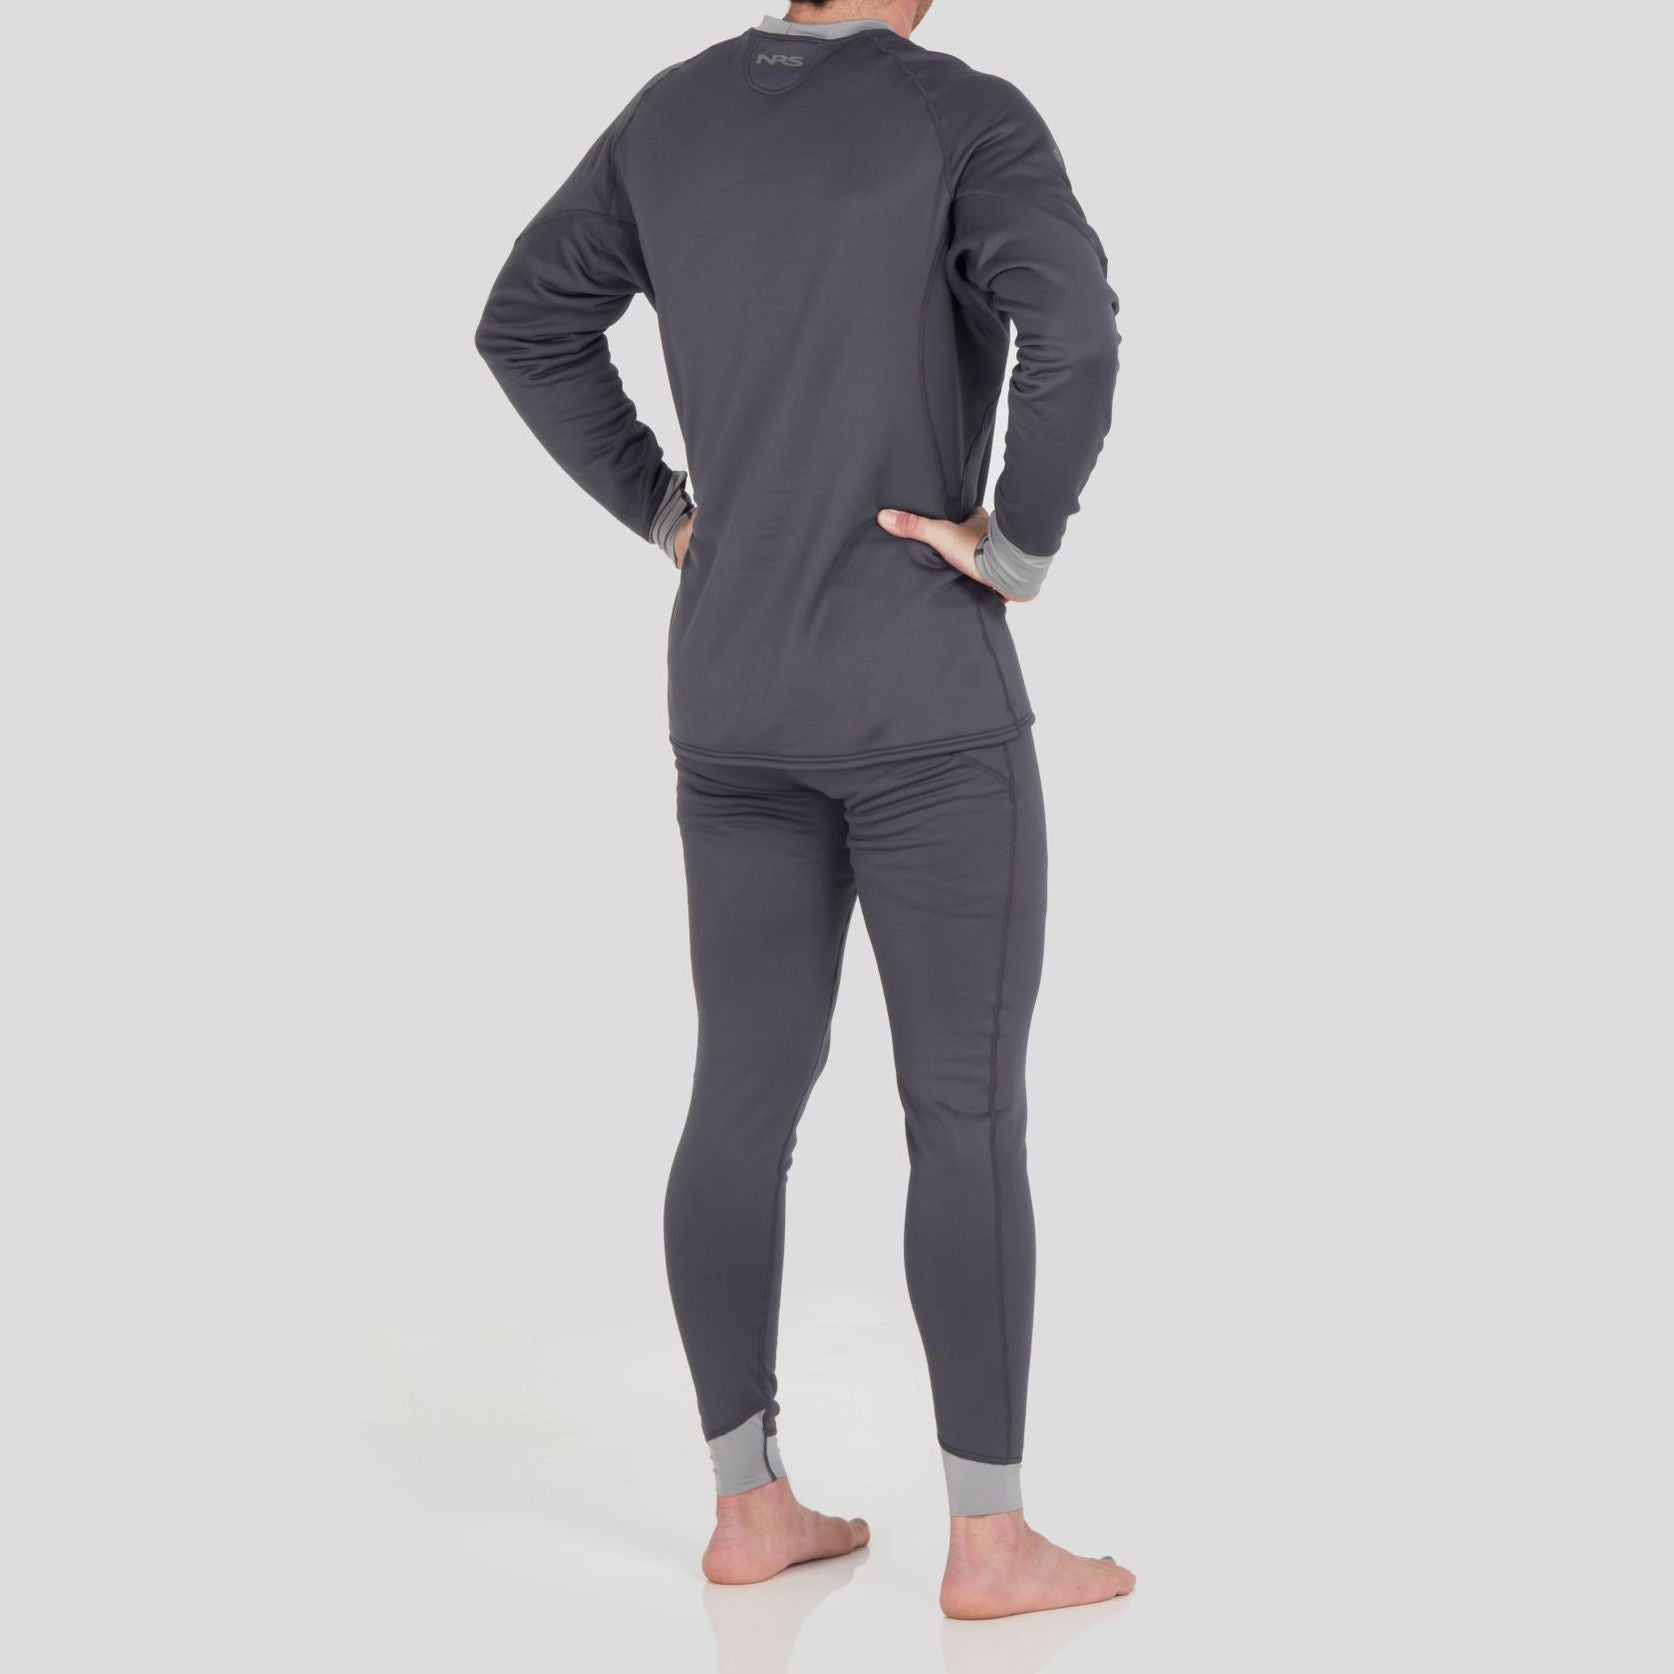 NRS Expedition Weight Union Base Layer Trøje, Herre